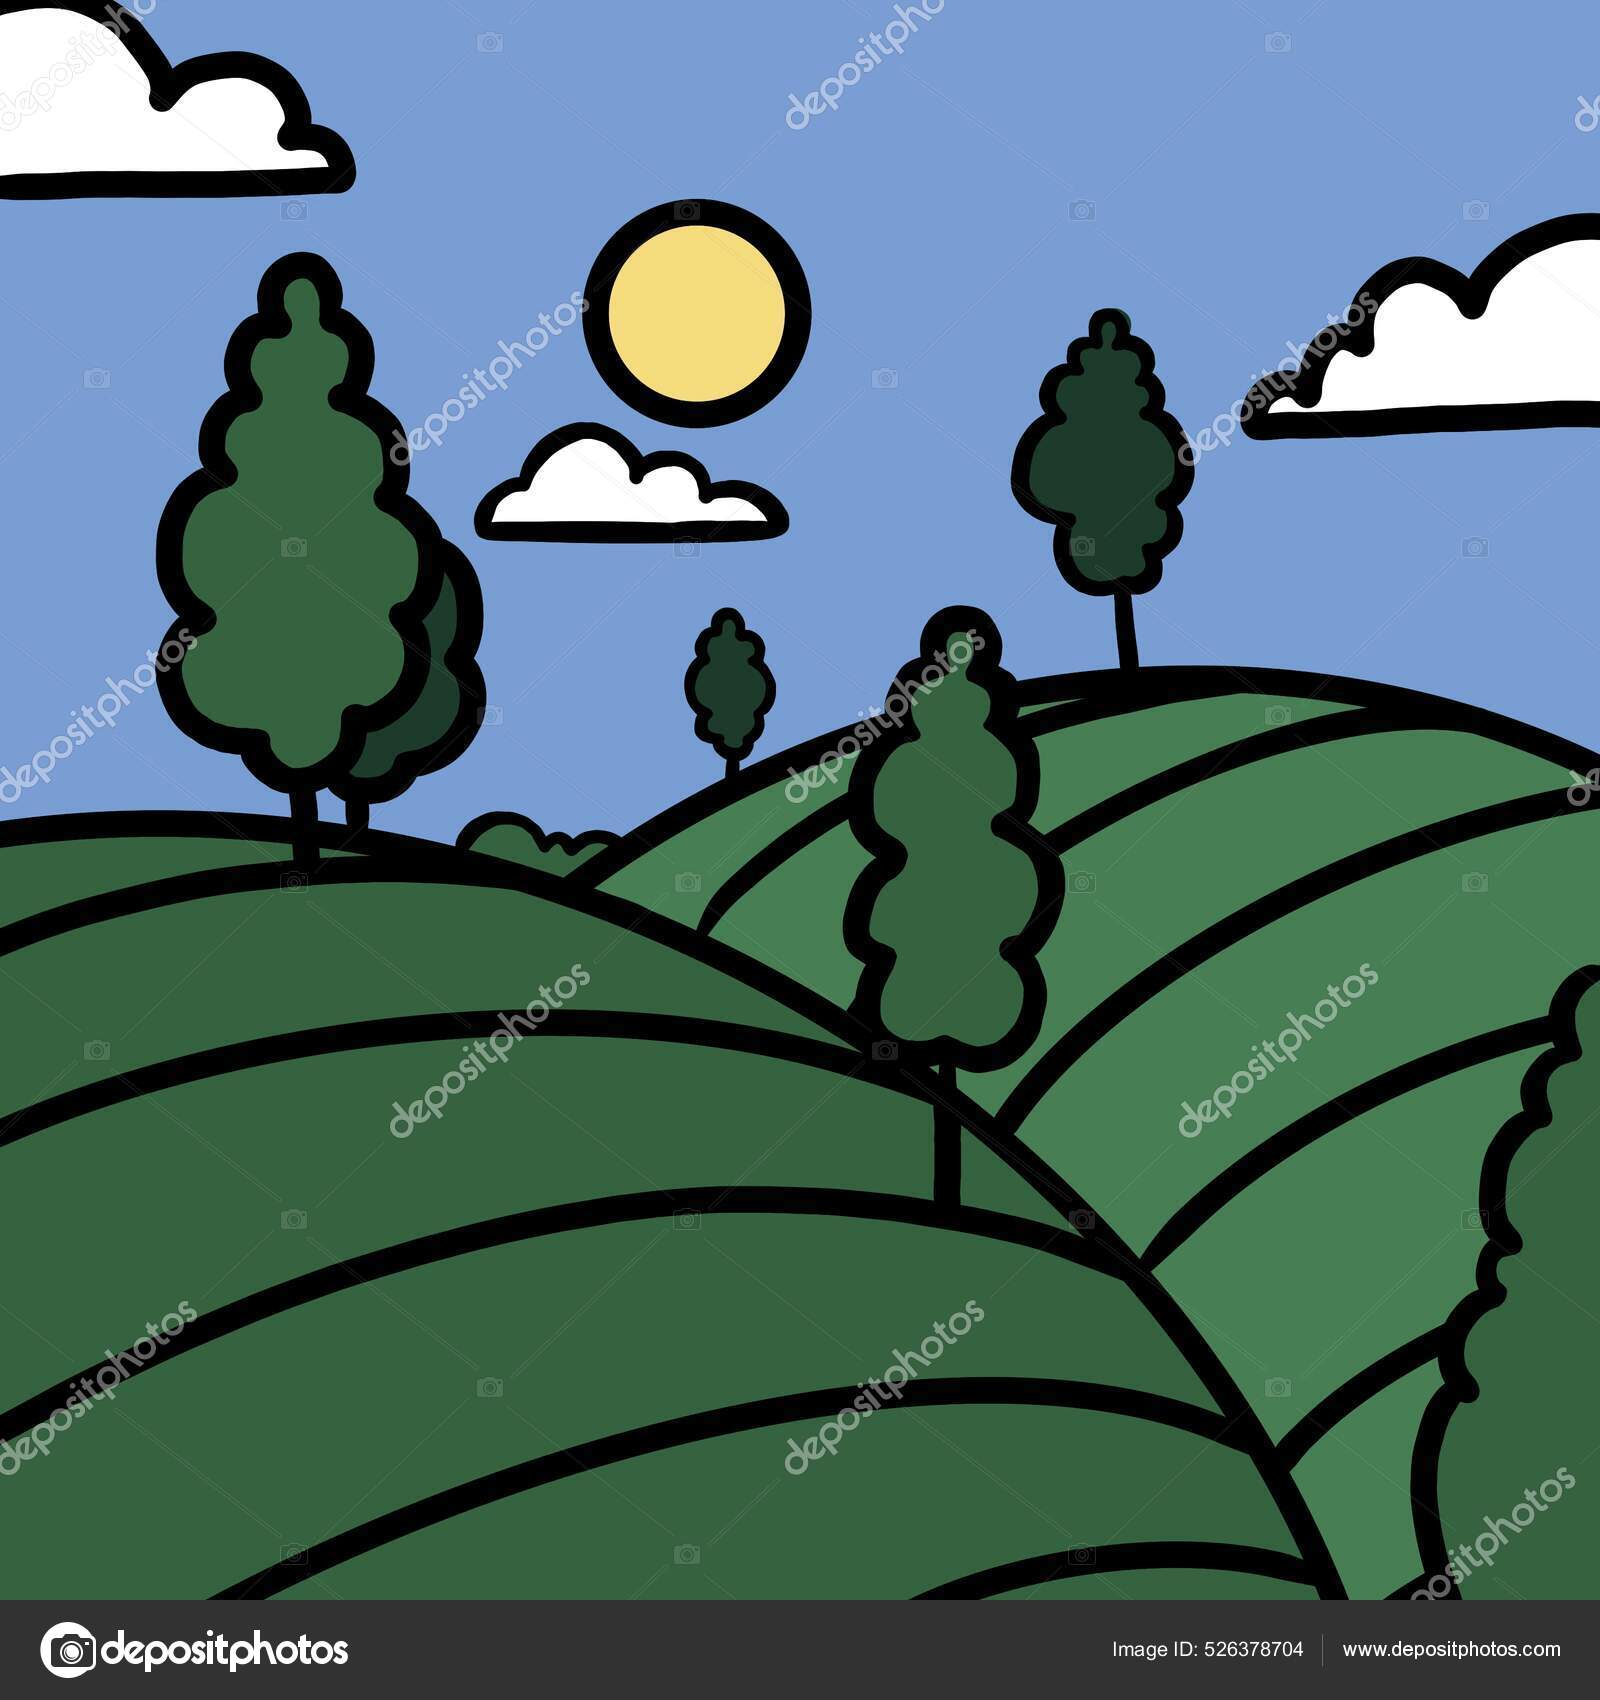 a landscape illustration in a square. simple cartoon drawing in